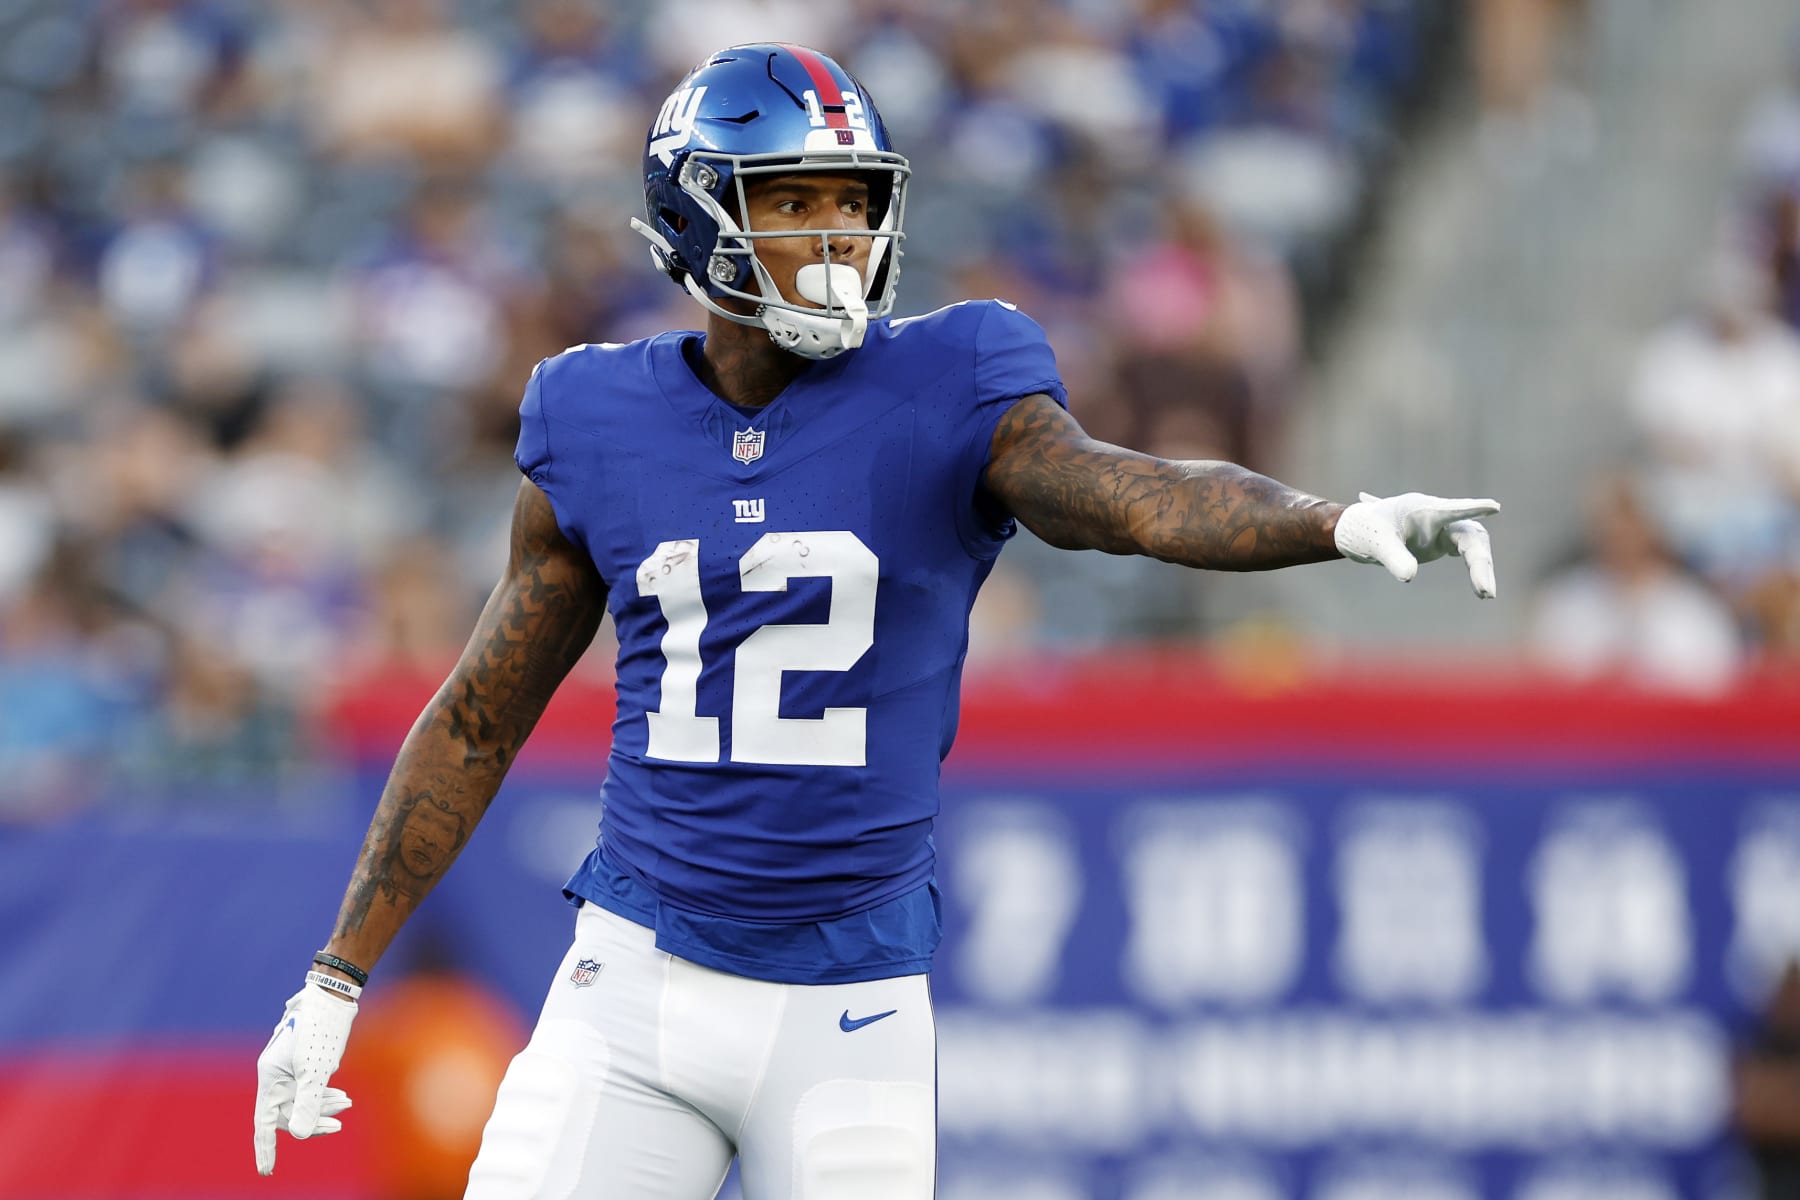 Giants vs. Cowboys DFS lineup for Monday Night Football: Can we